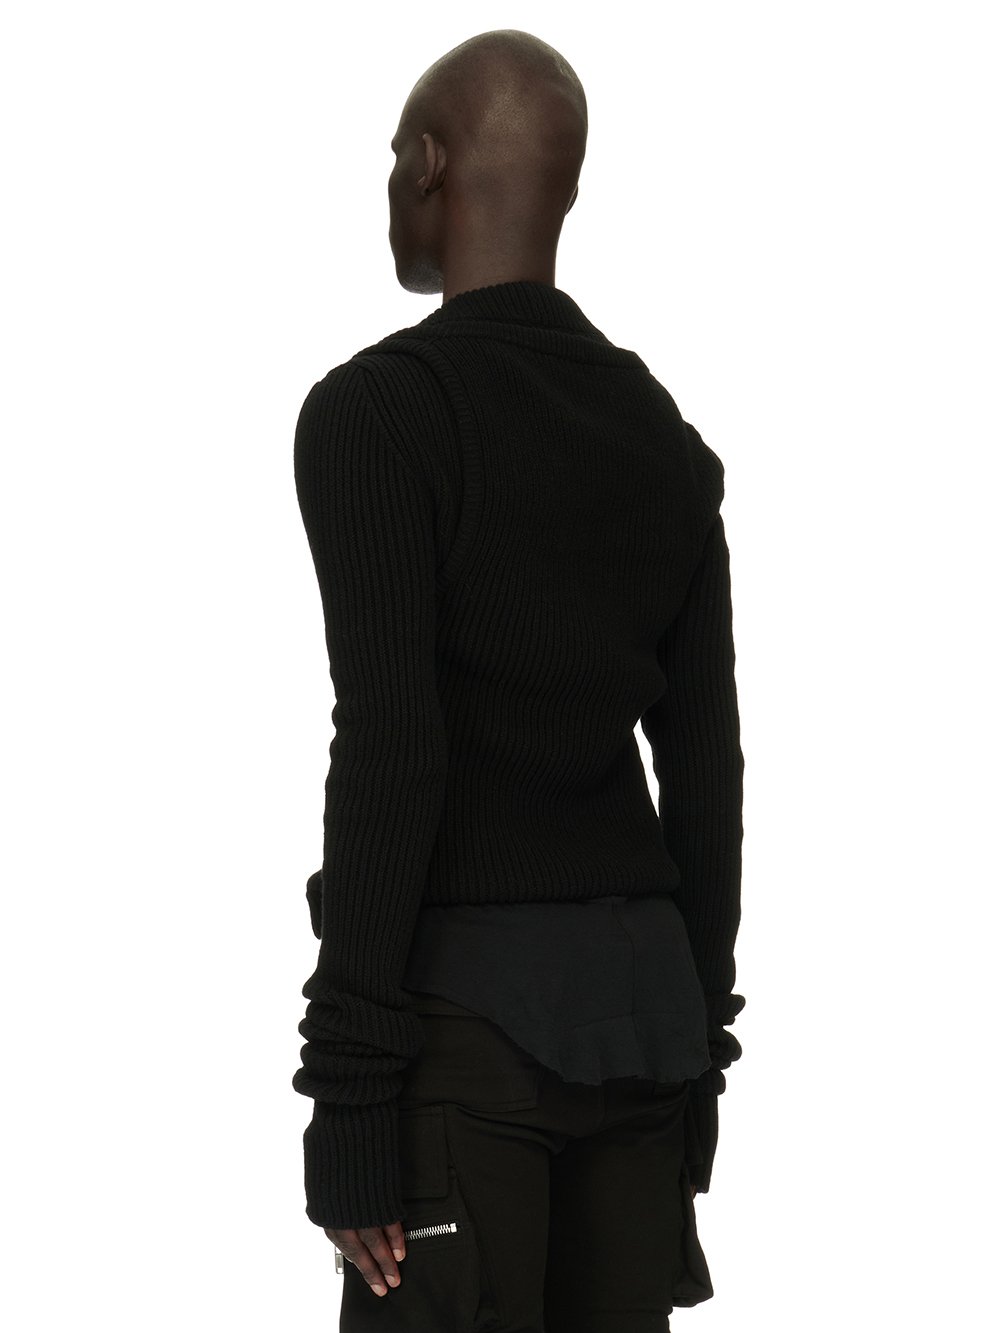 RICK OWENS FW23 LUXOR BANANA LS IN BLACK RECYCLED CASHMERE KNIT